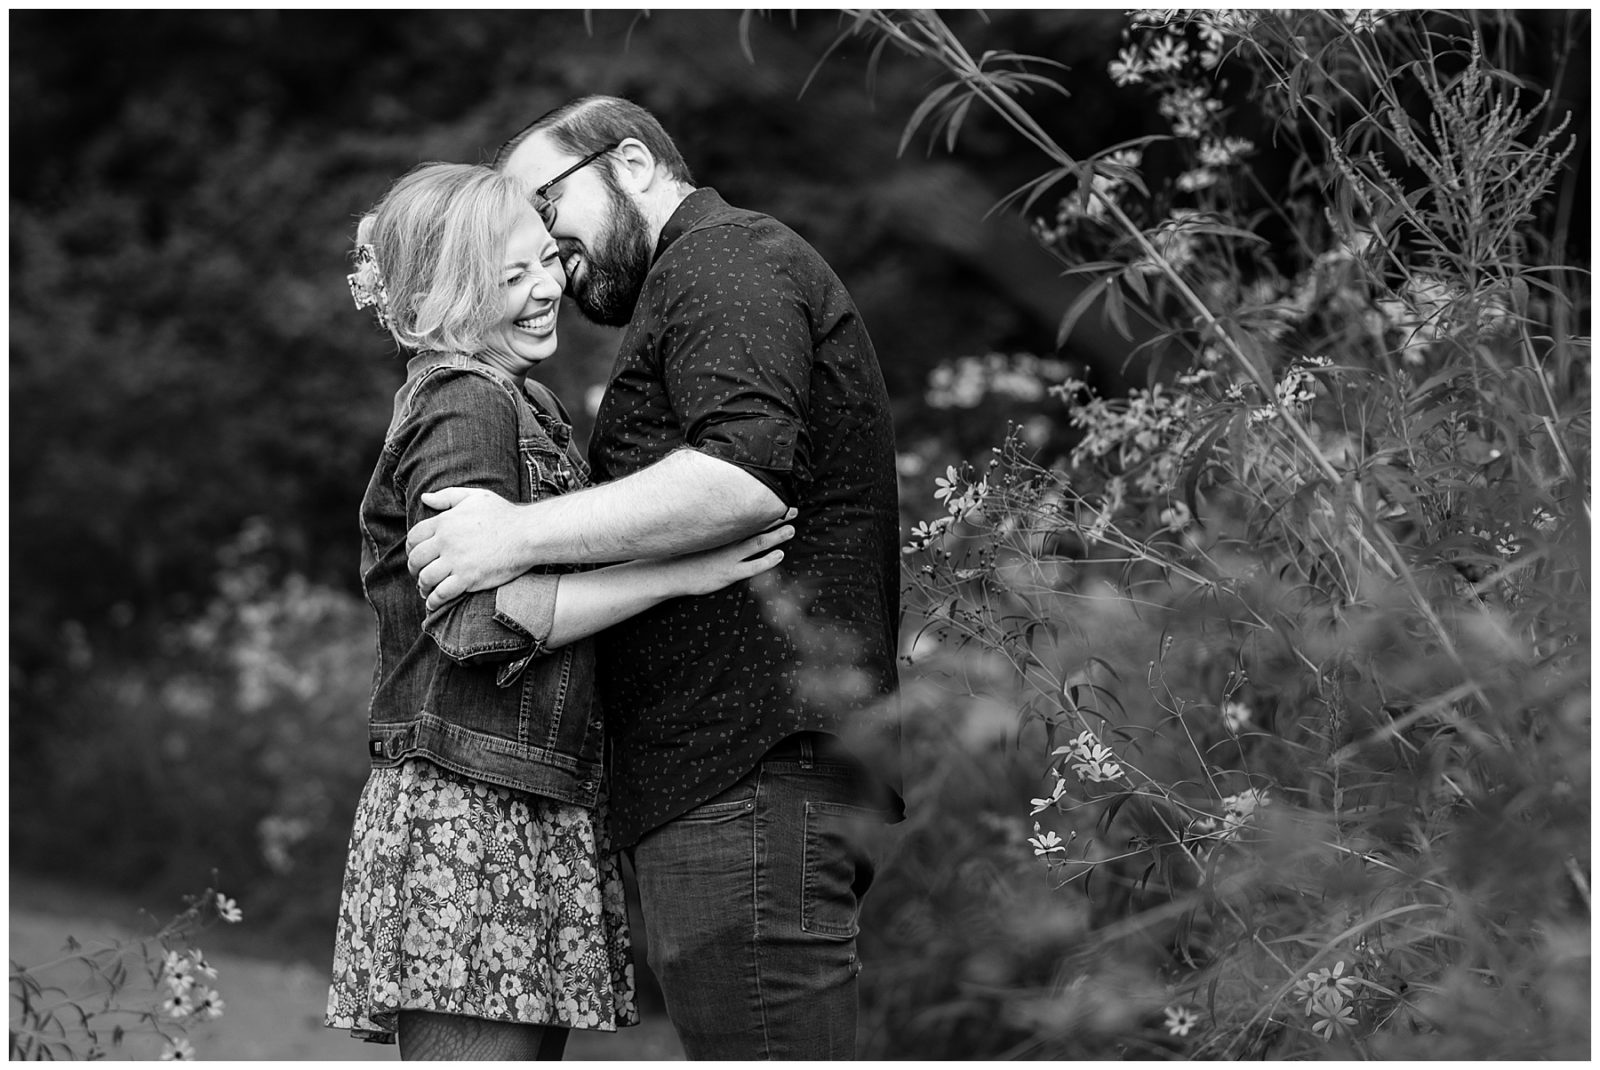 An August Ohio Engagement Session at Jordan Creek Park in Painesville Ohio, fun, candid photos